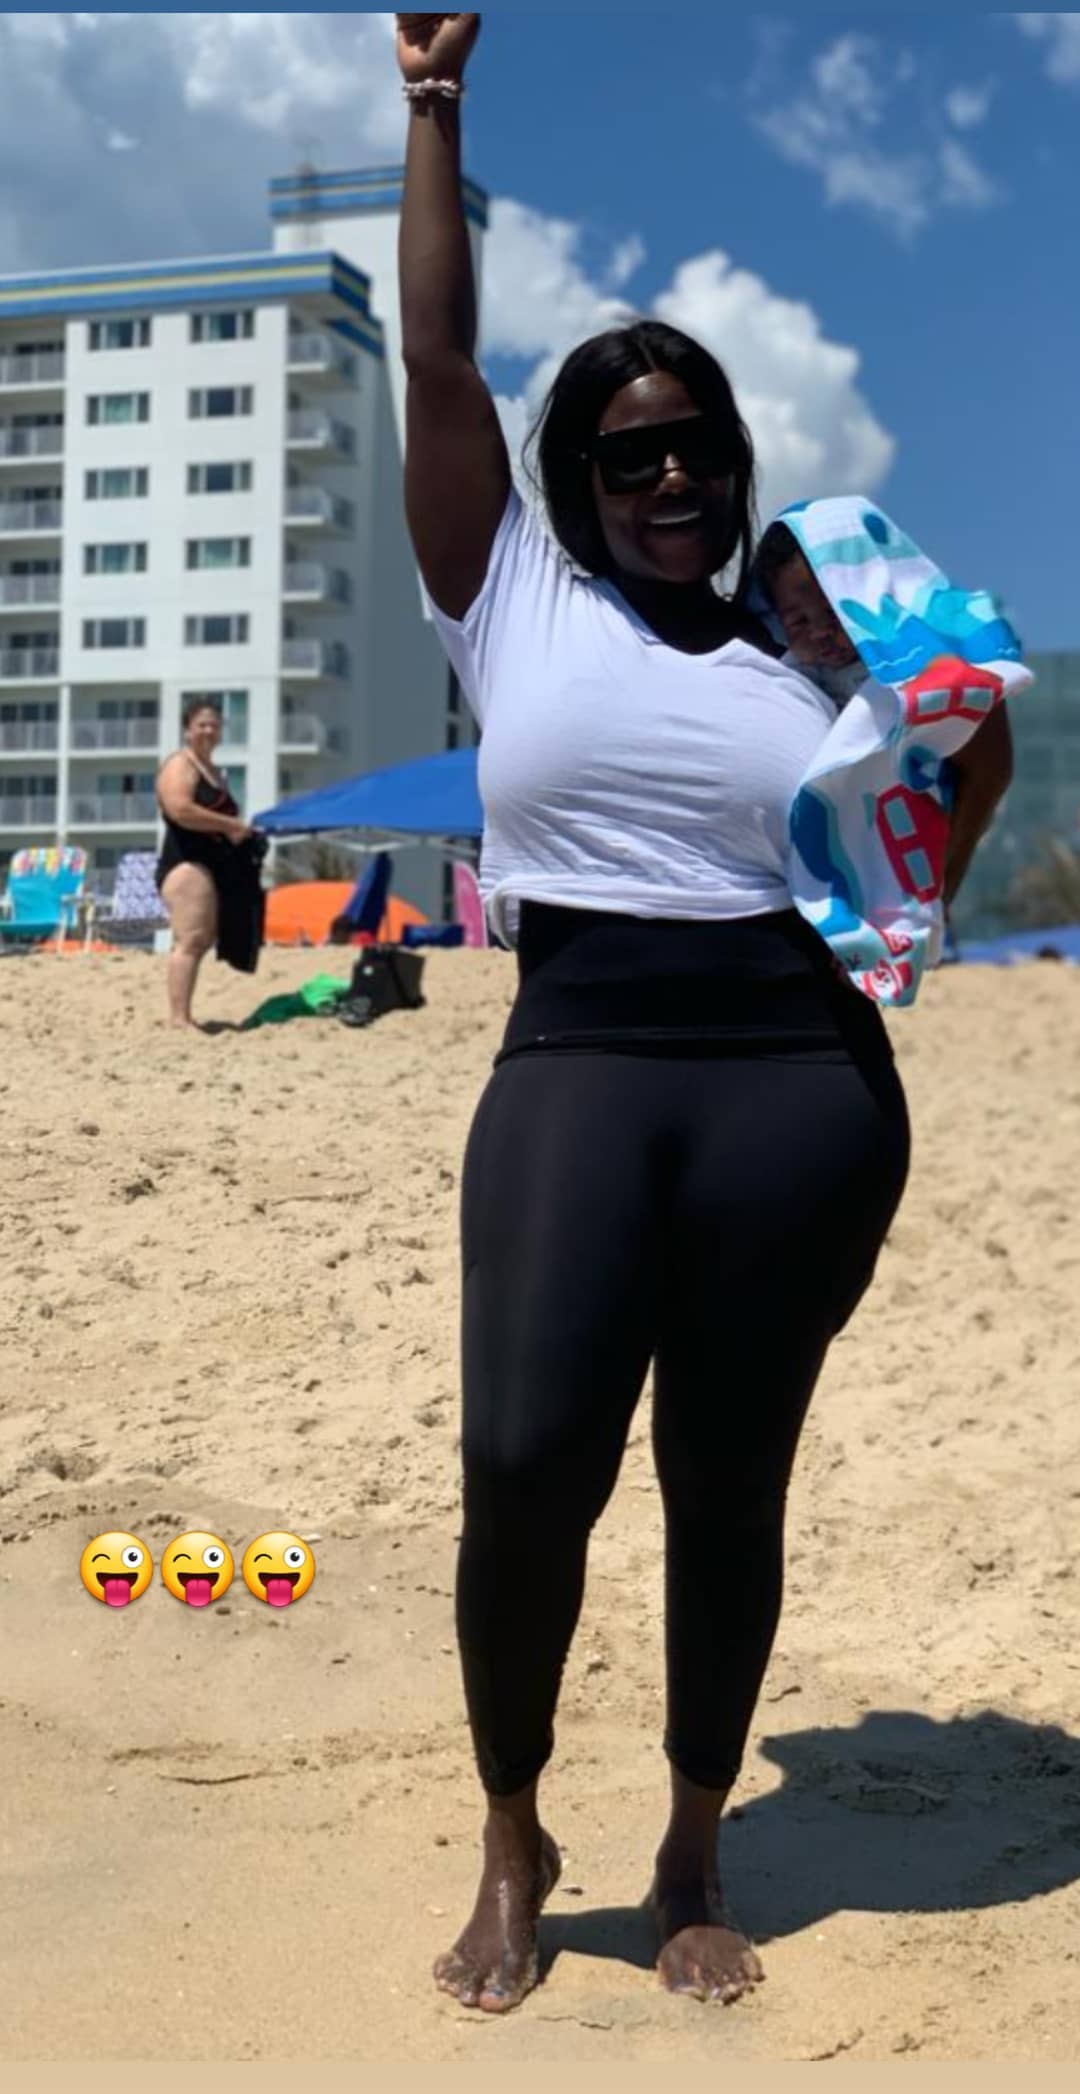 Mercy Johnson And Her Baby Together With The Family Set For Beach - Photos+Video